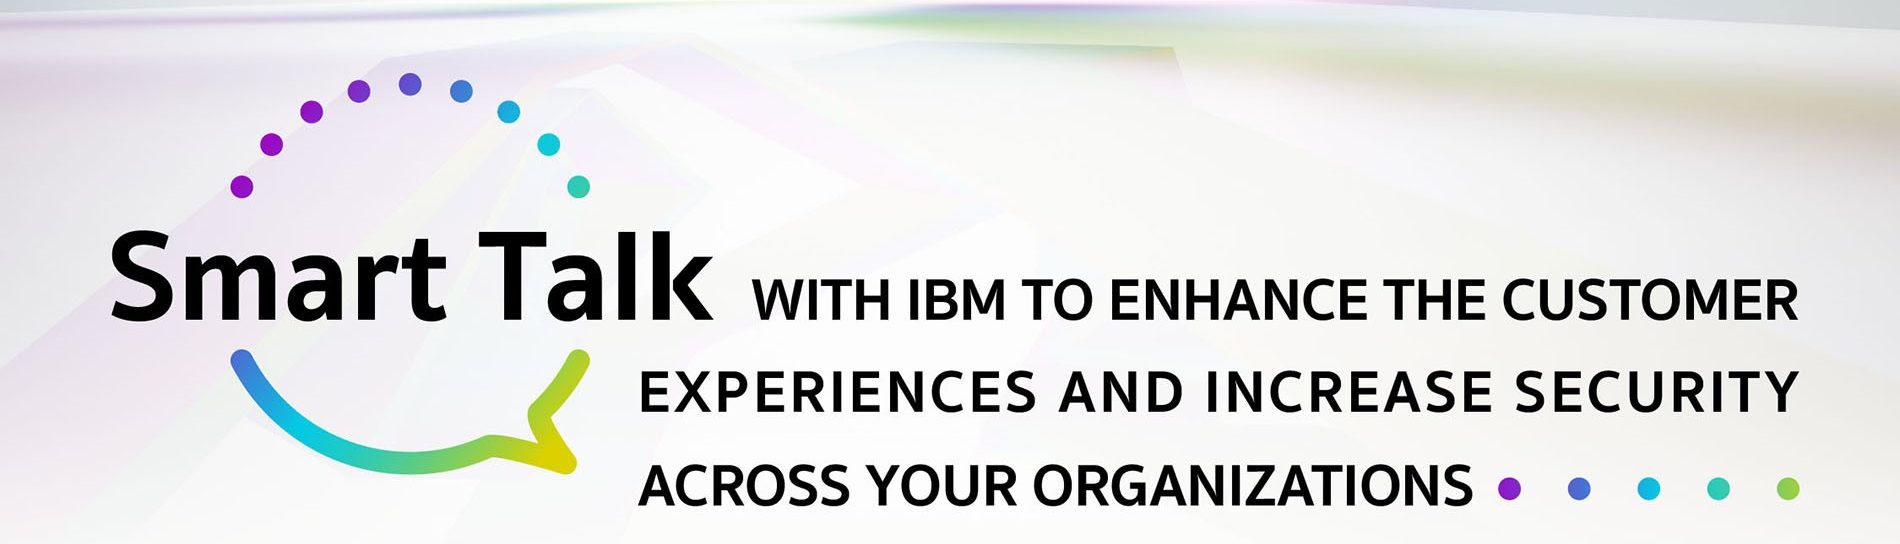 Smart Talk WITH IBM TO ENHANCE THE CUSTOMER EXPERIENCES AND INCREASE SECURITY ACROSS YOUR ORGANIZATIONS 24 July 2023